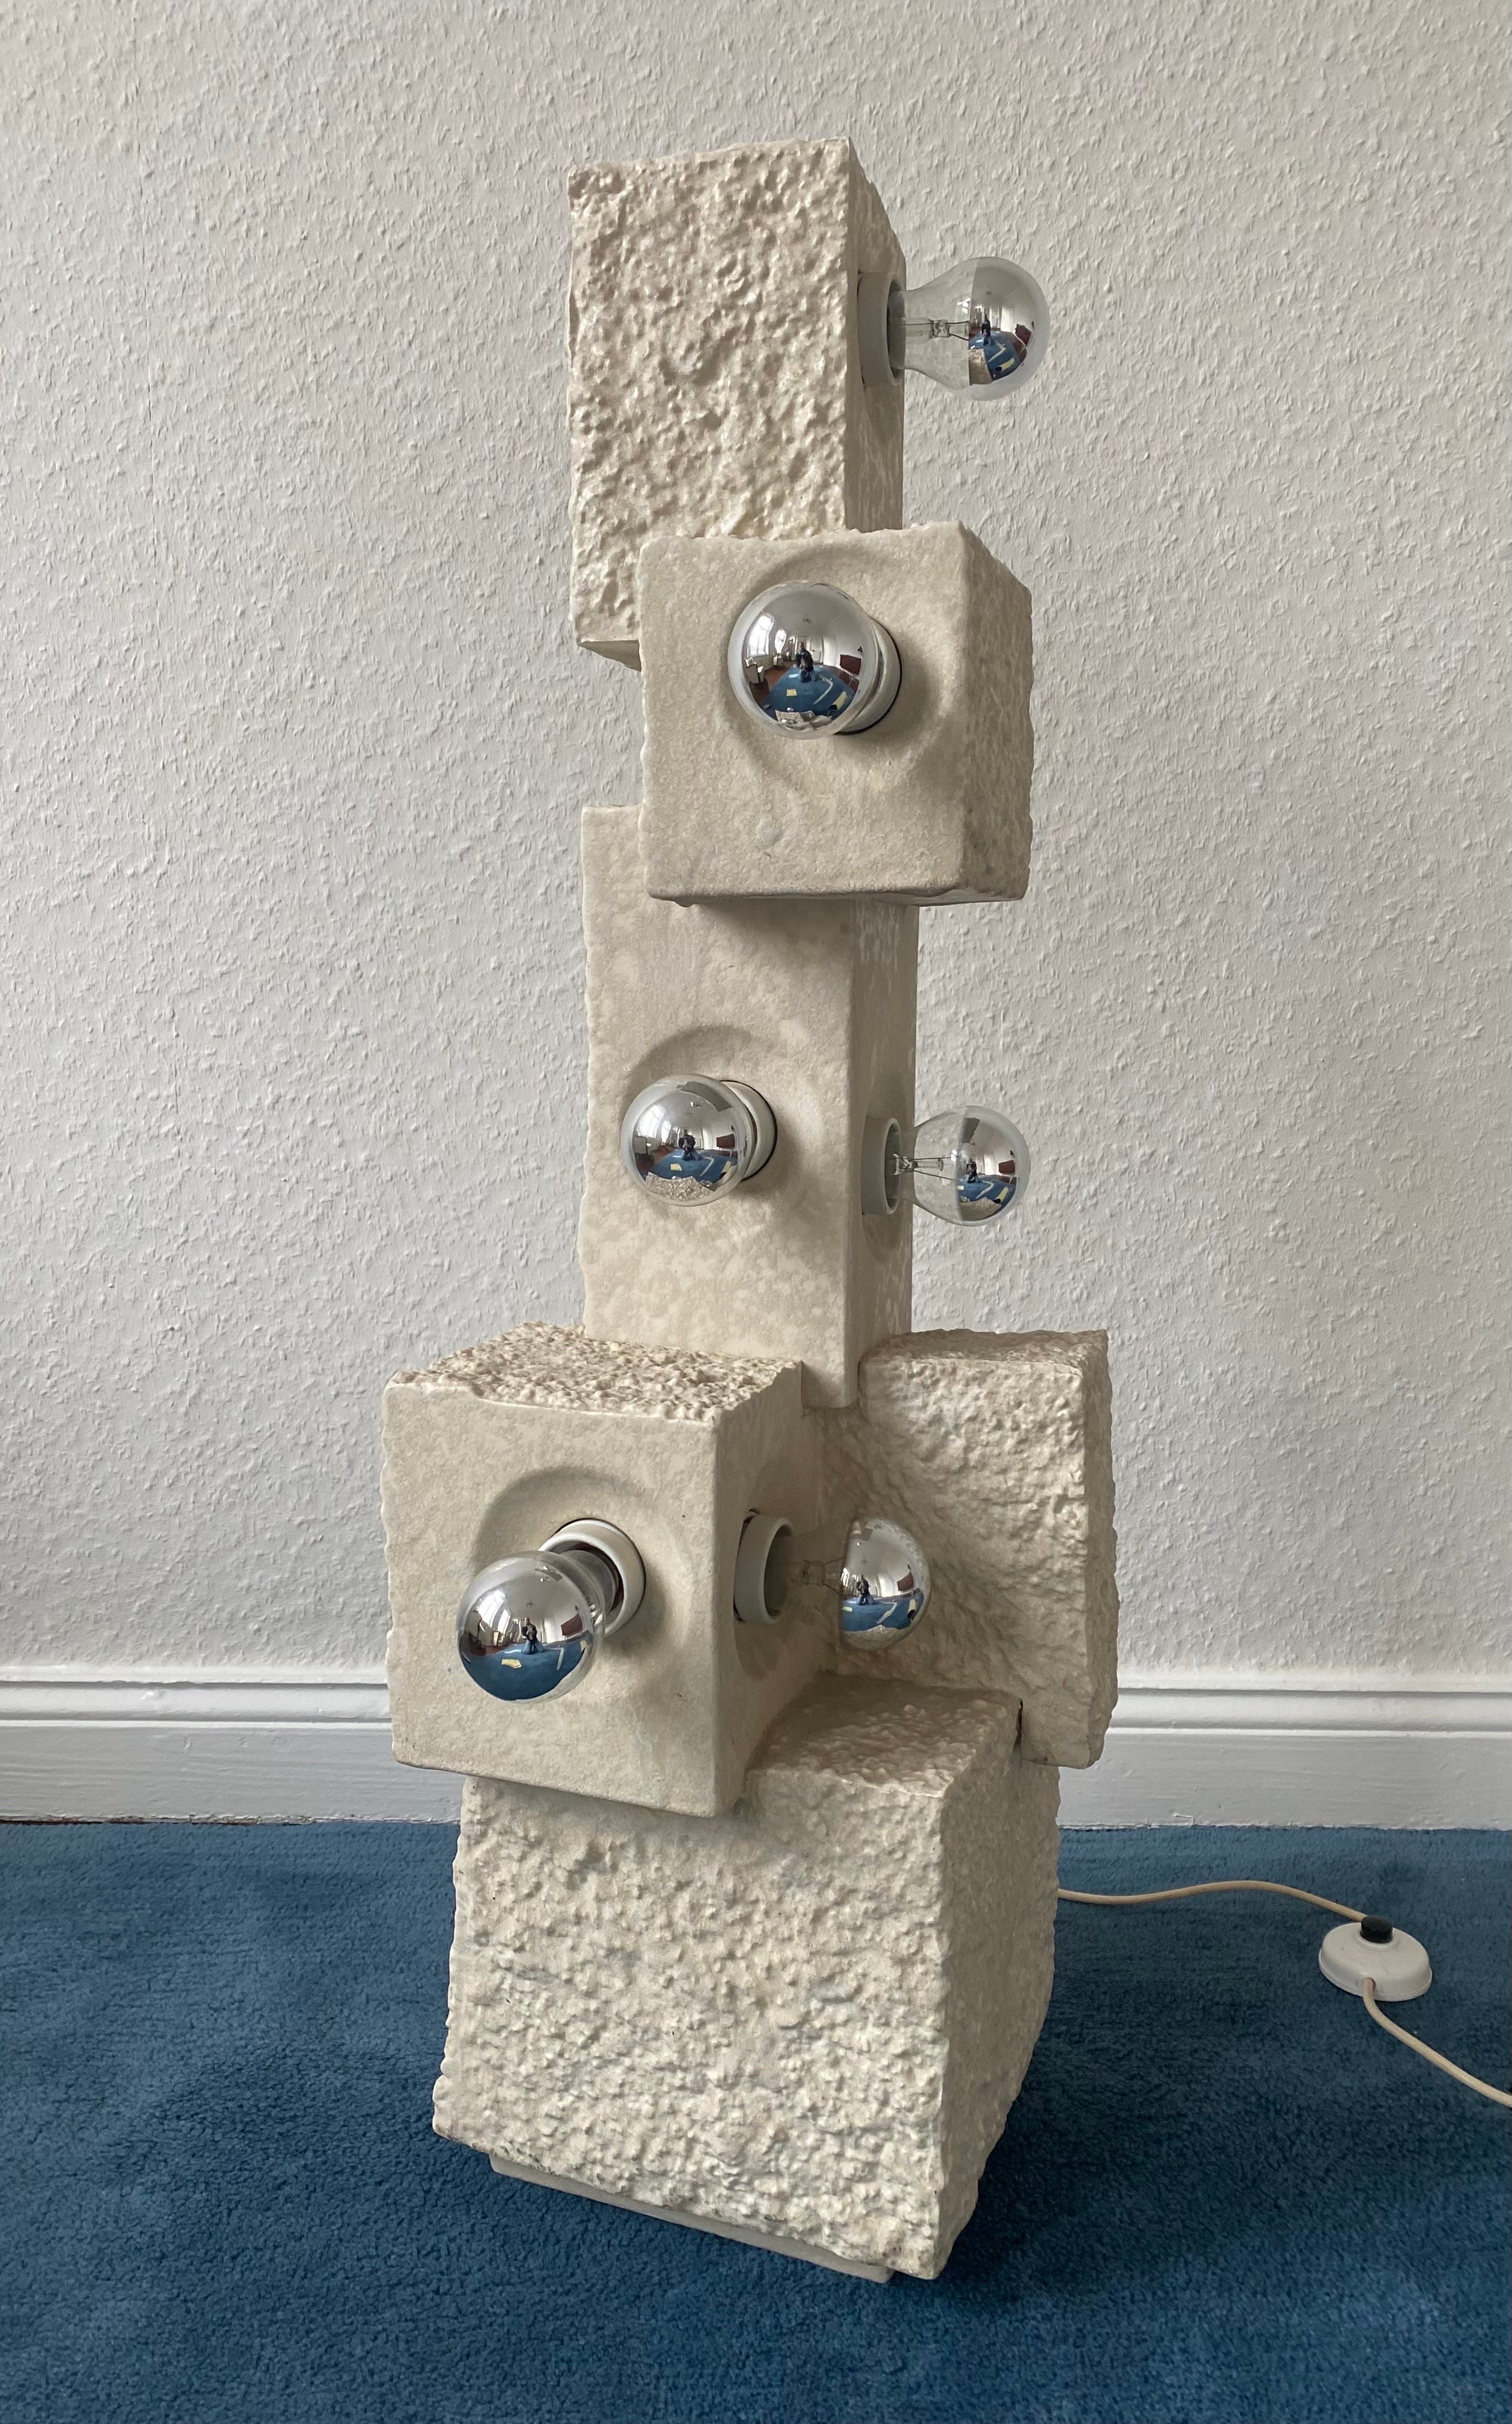 An ultra rare and extraordinary Brutalist  Ceramic Light Sculpture  by Traudl Brunnquell from around 1974.

Inspired from Cubism and modern Architecture especially Brutalism this Lamp Sculpture is outstanding in the Lamp Designs of this Era.

The